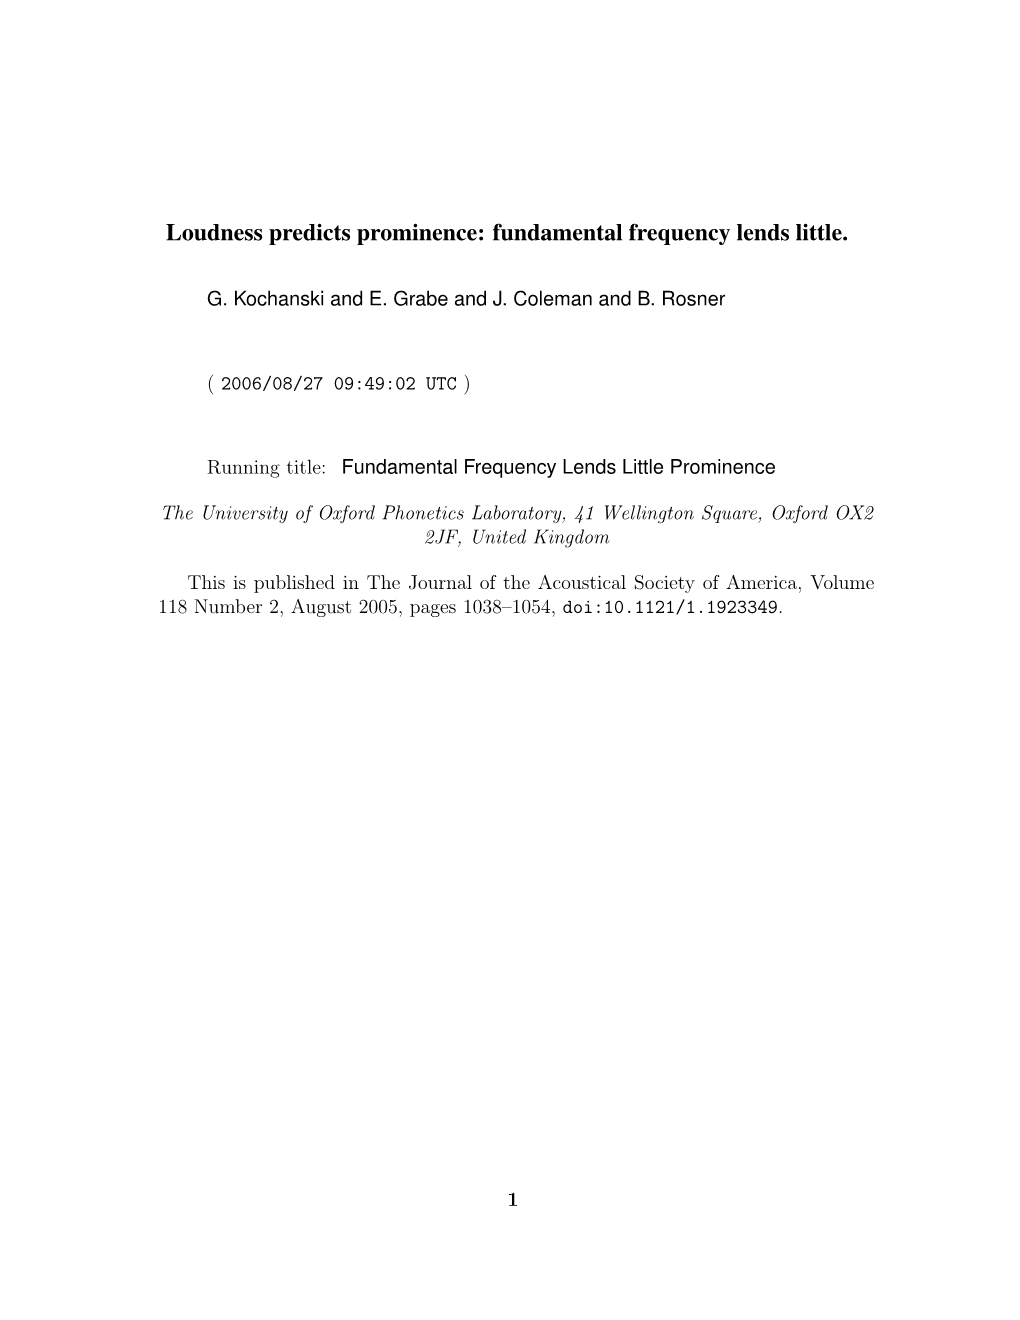 Loudness Predicts Prominence: Fundamental Frequency Lends Little